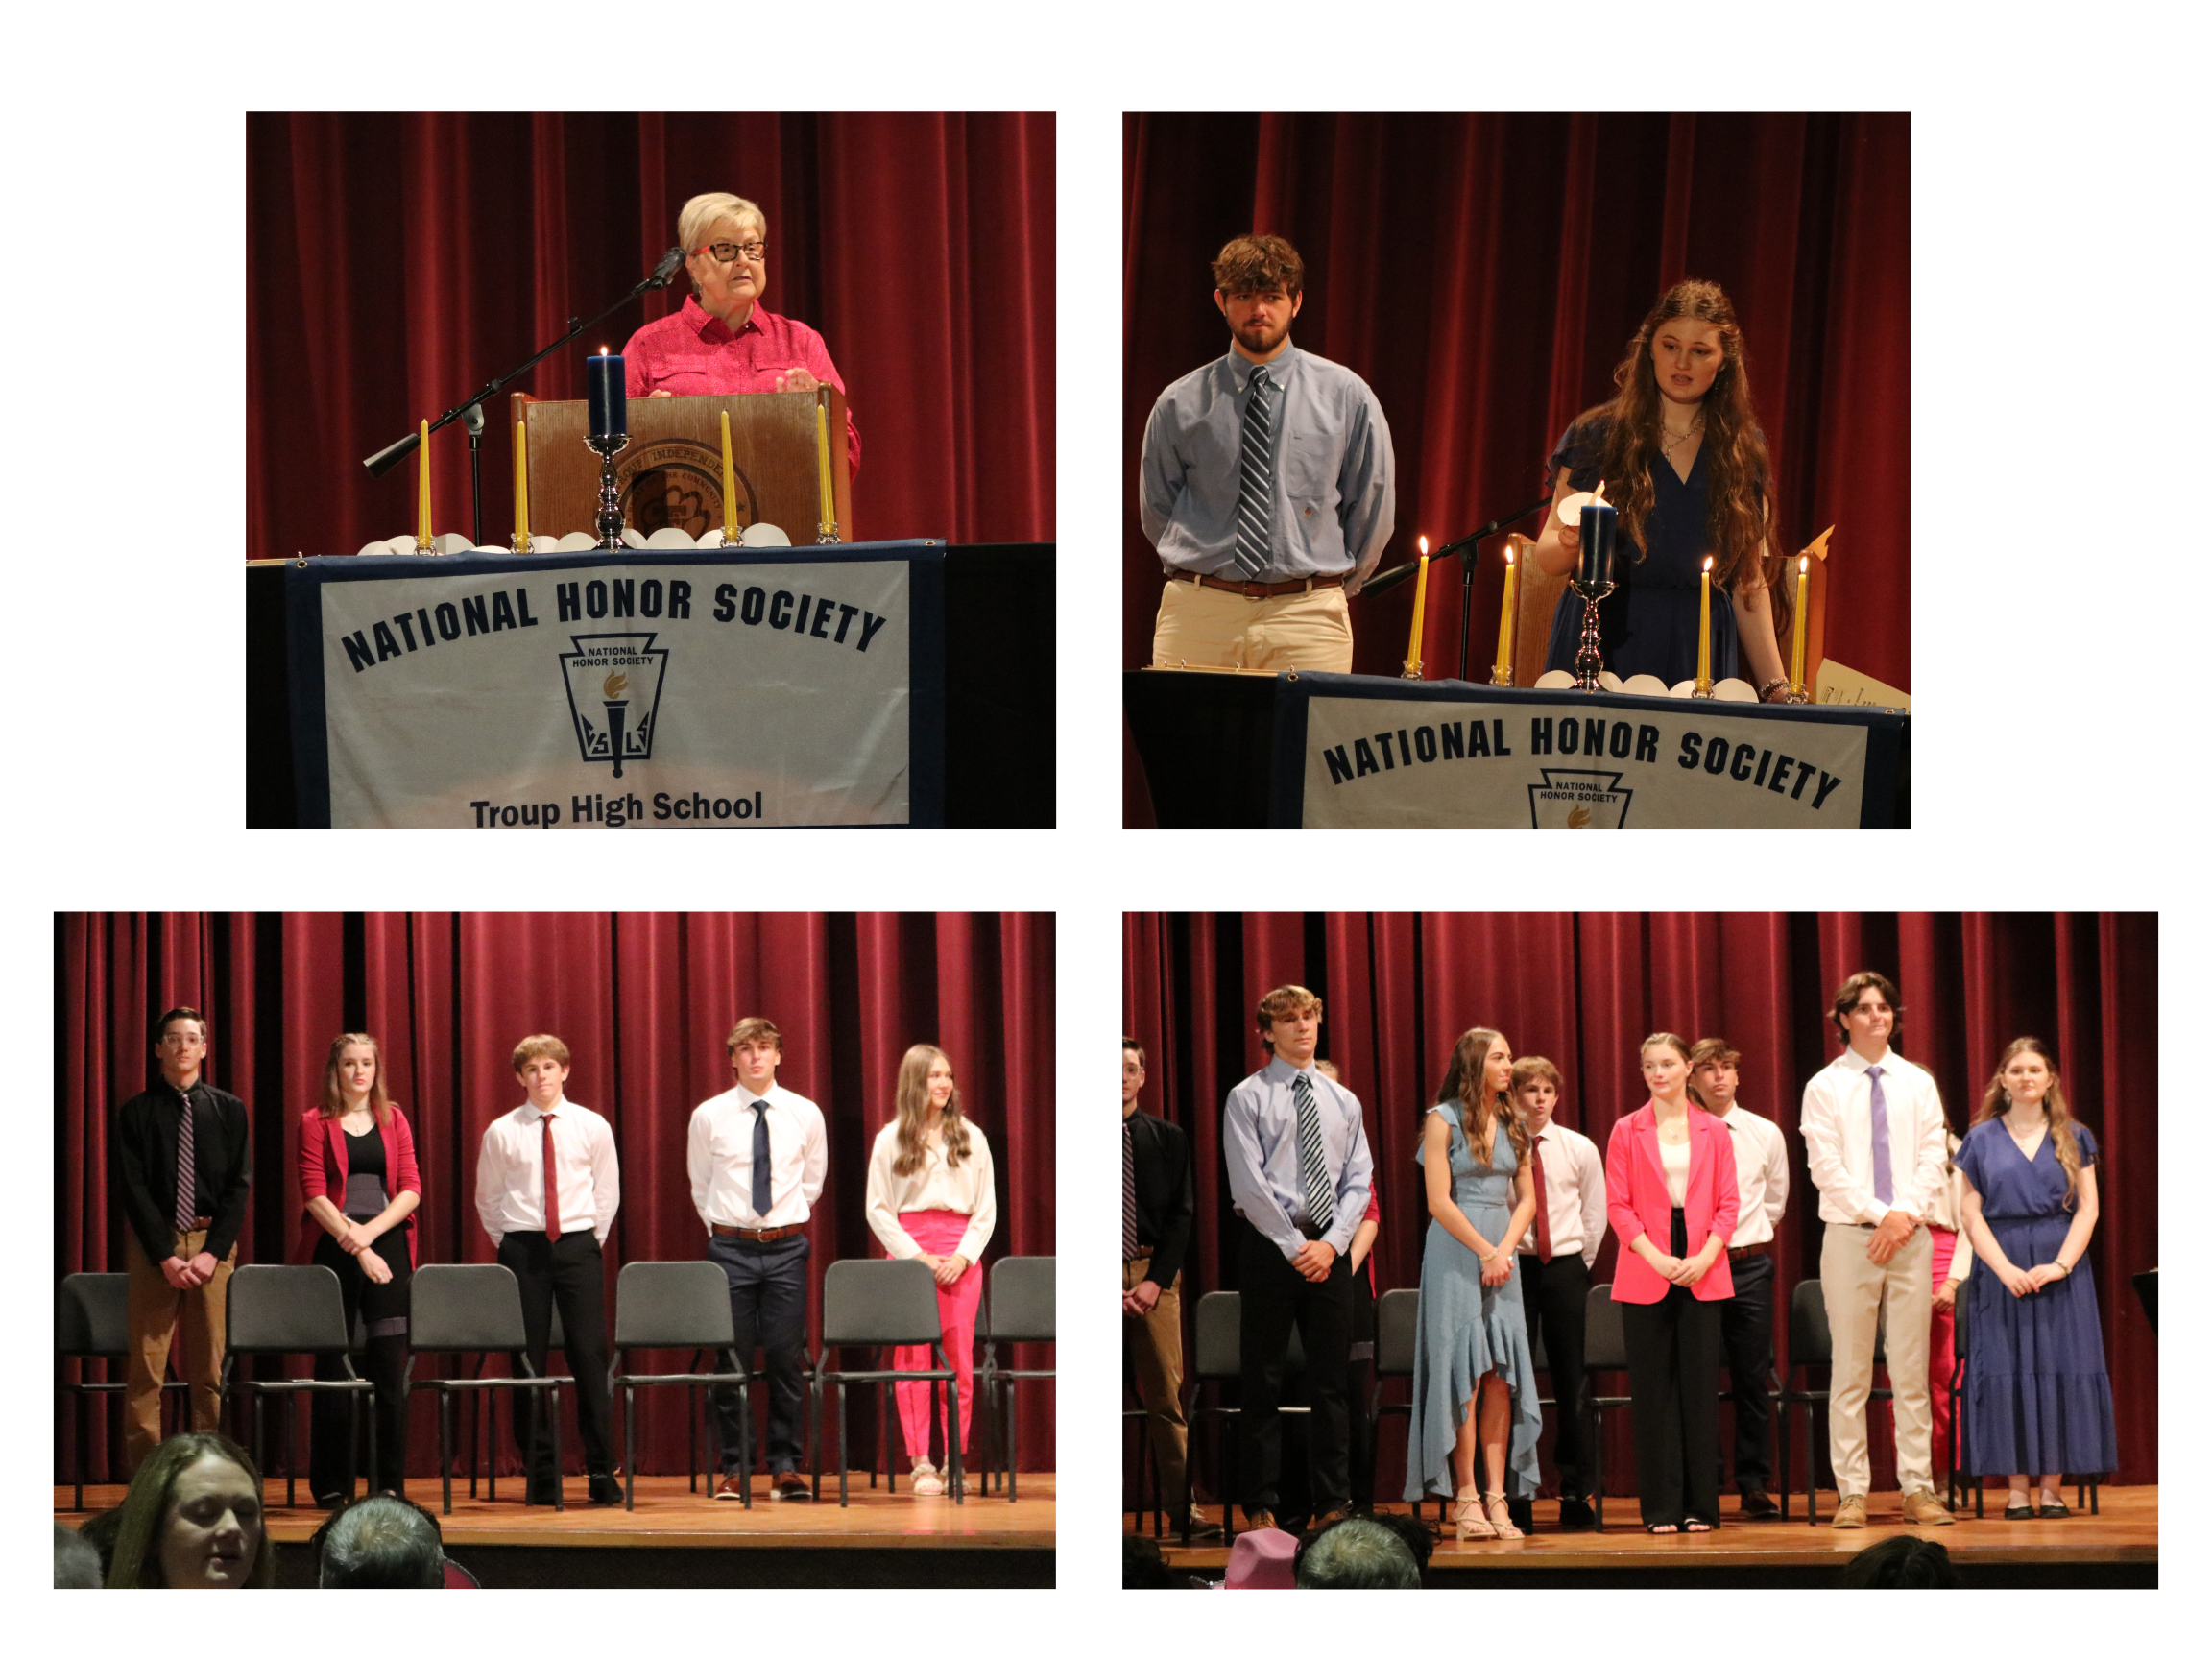 NHS induction